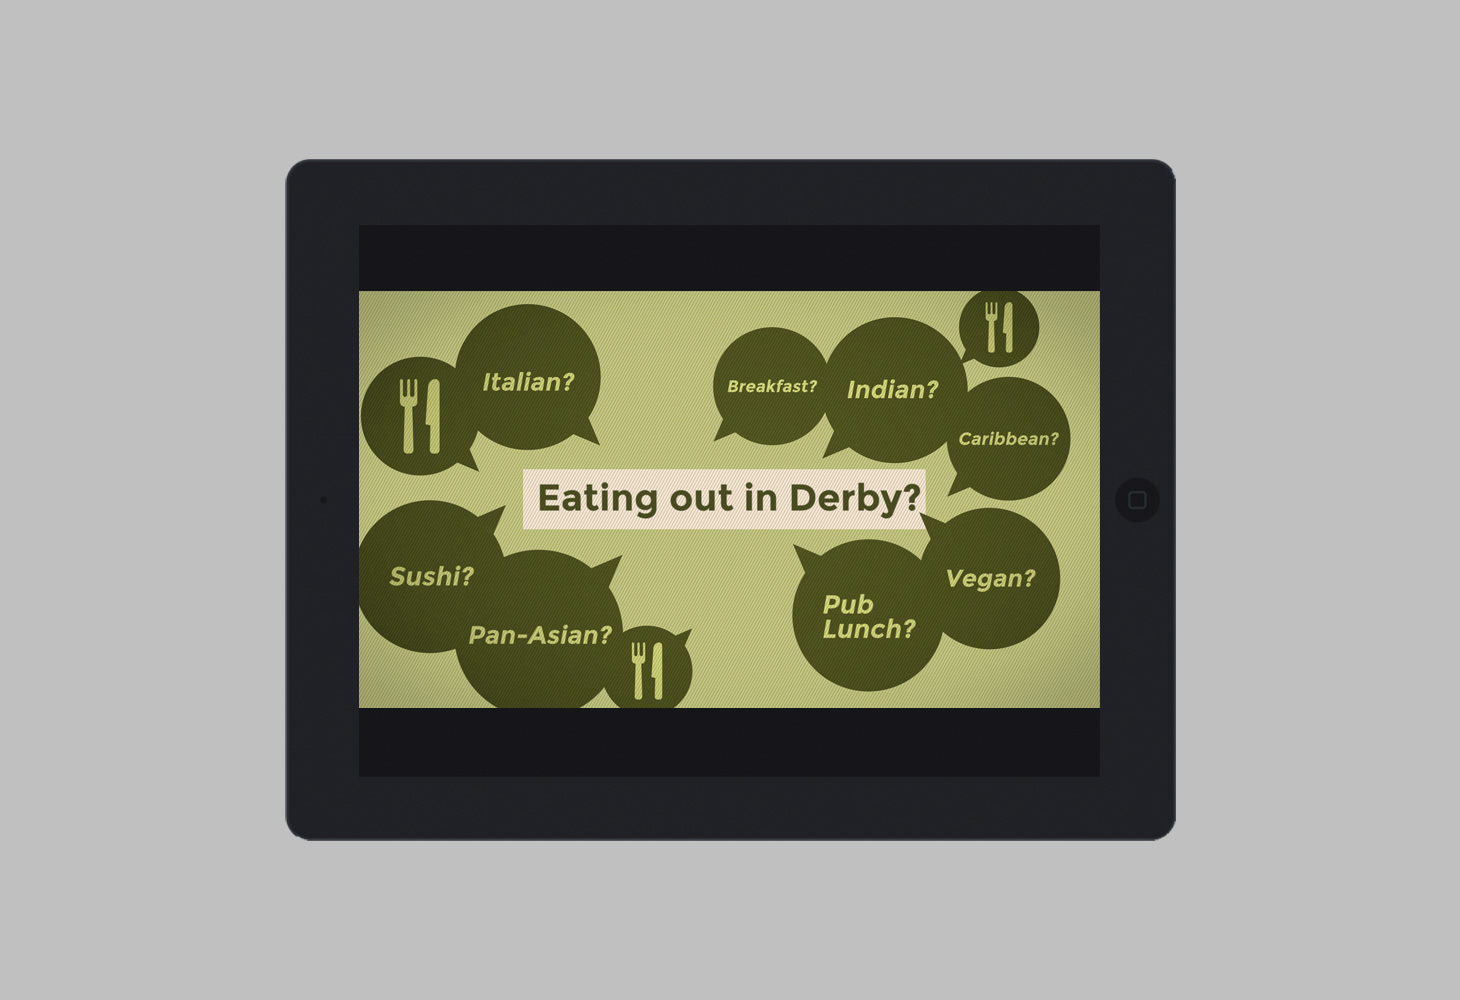 City of Derby - Animated Adverts - Eating in Derby?